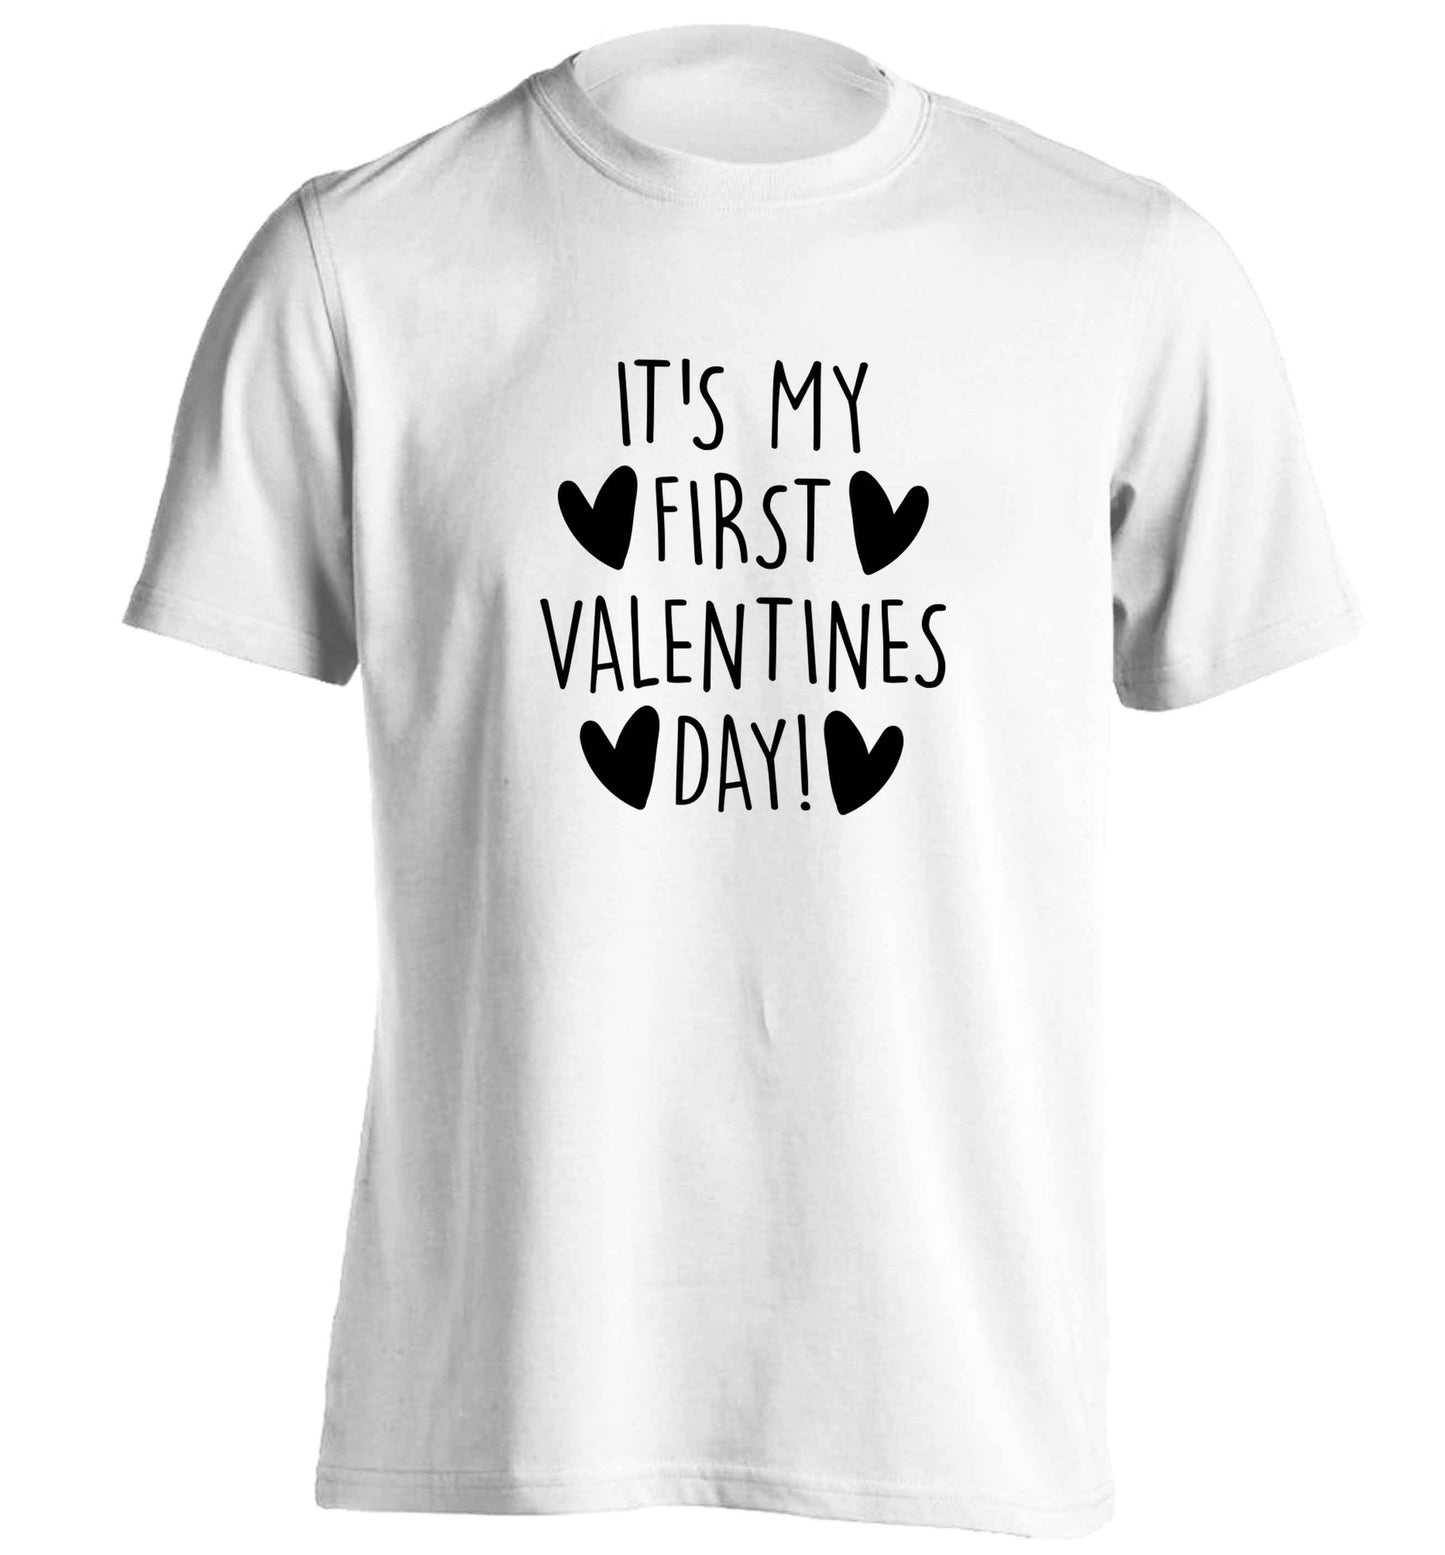 It's my first valentines day! adults unisex white Tshirt 2XL